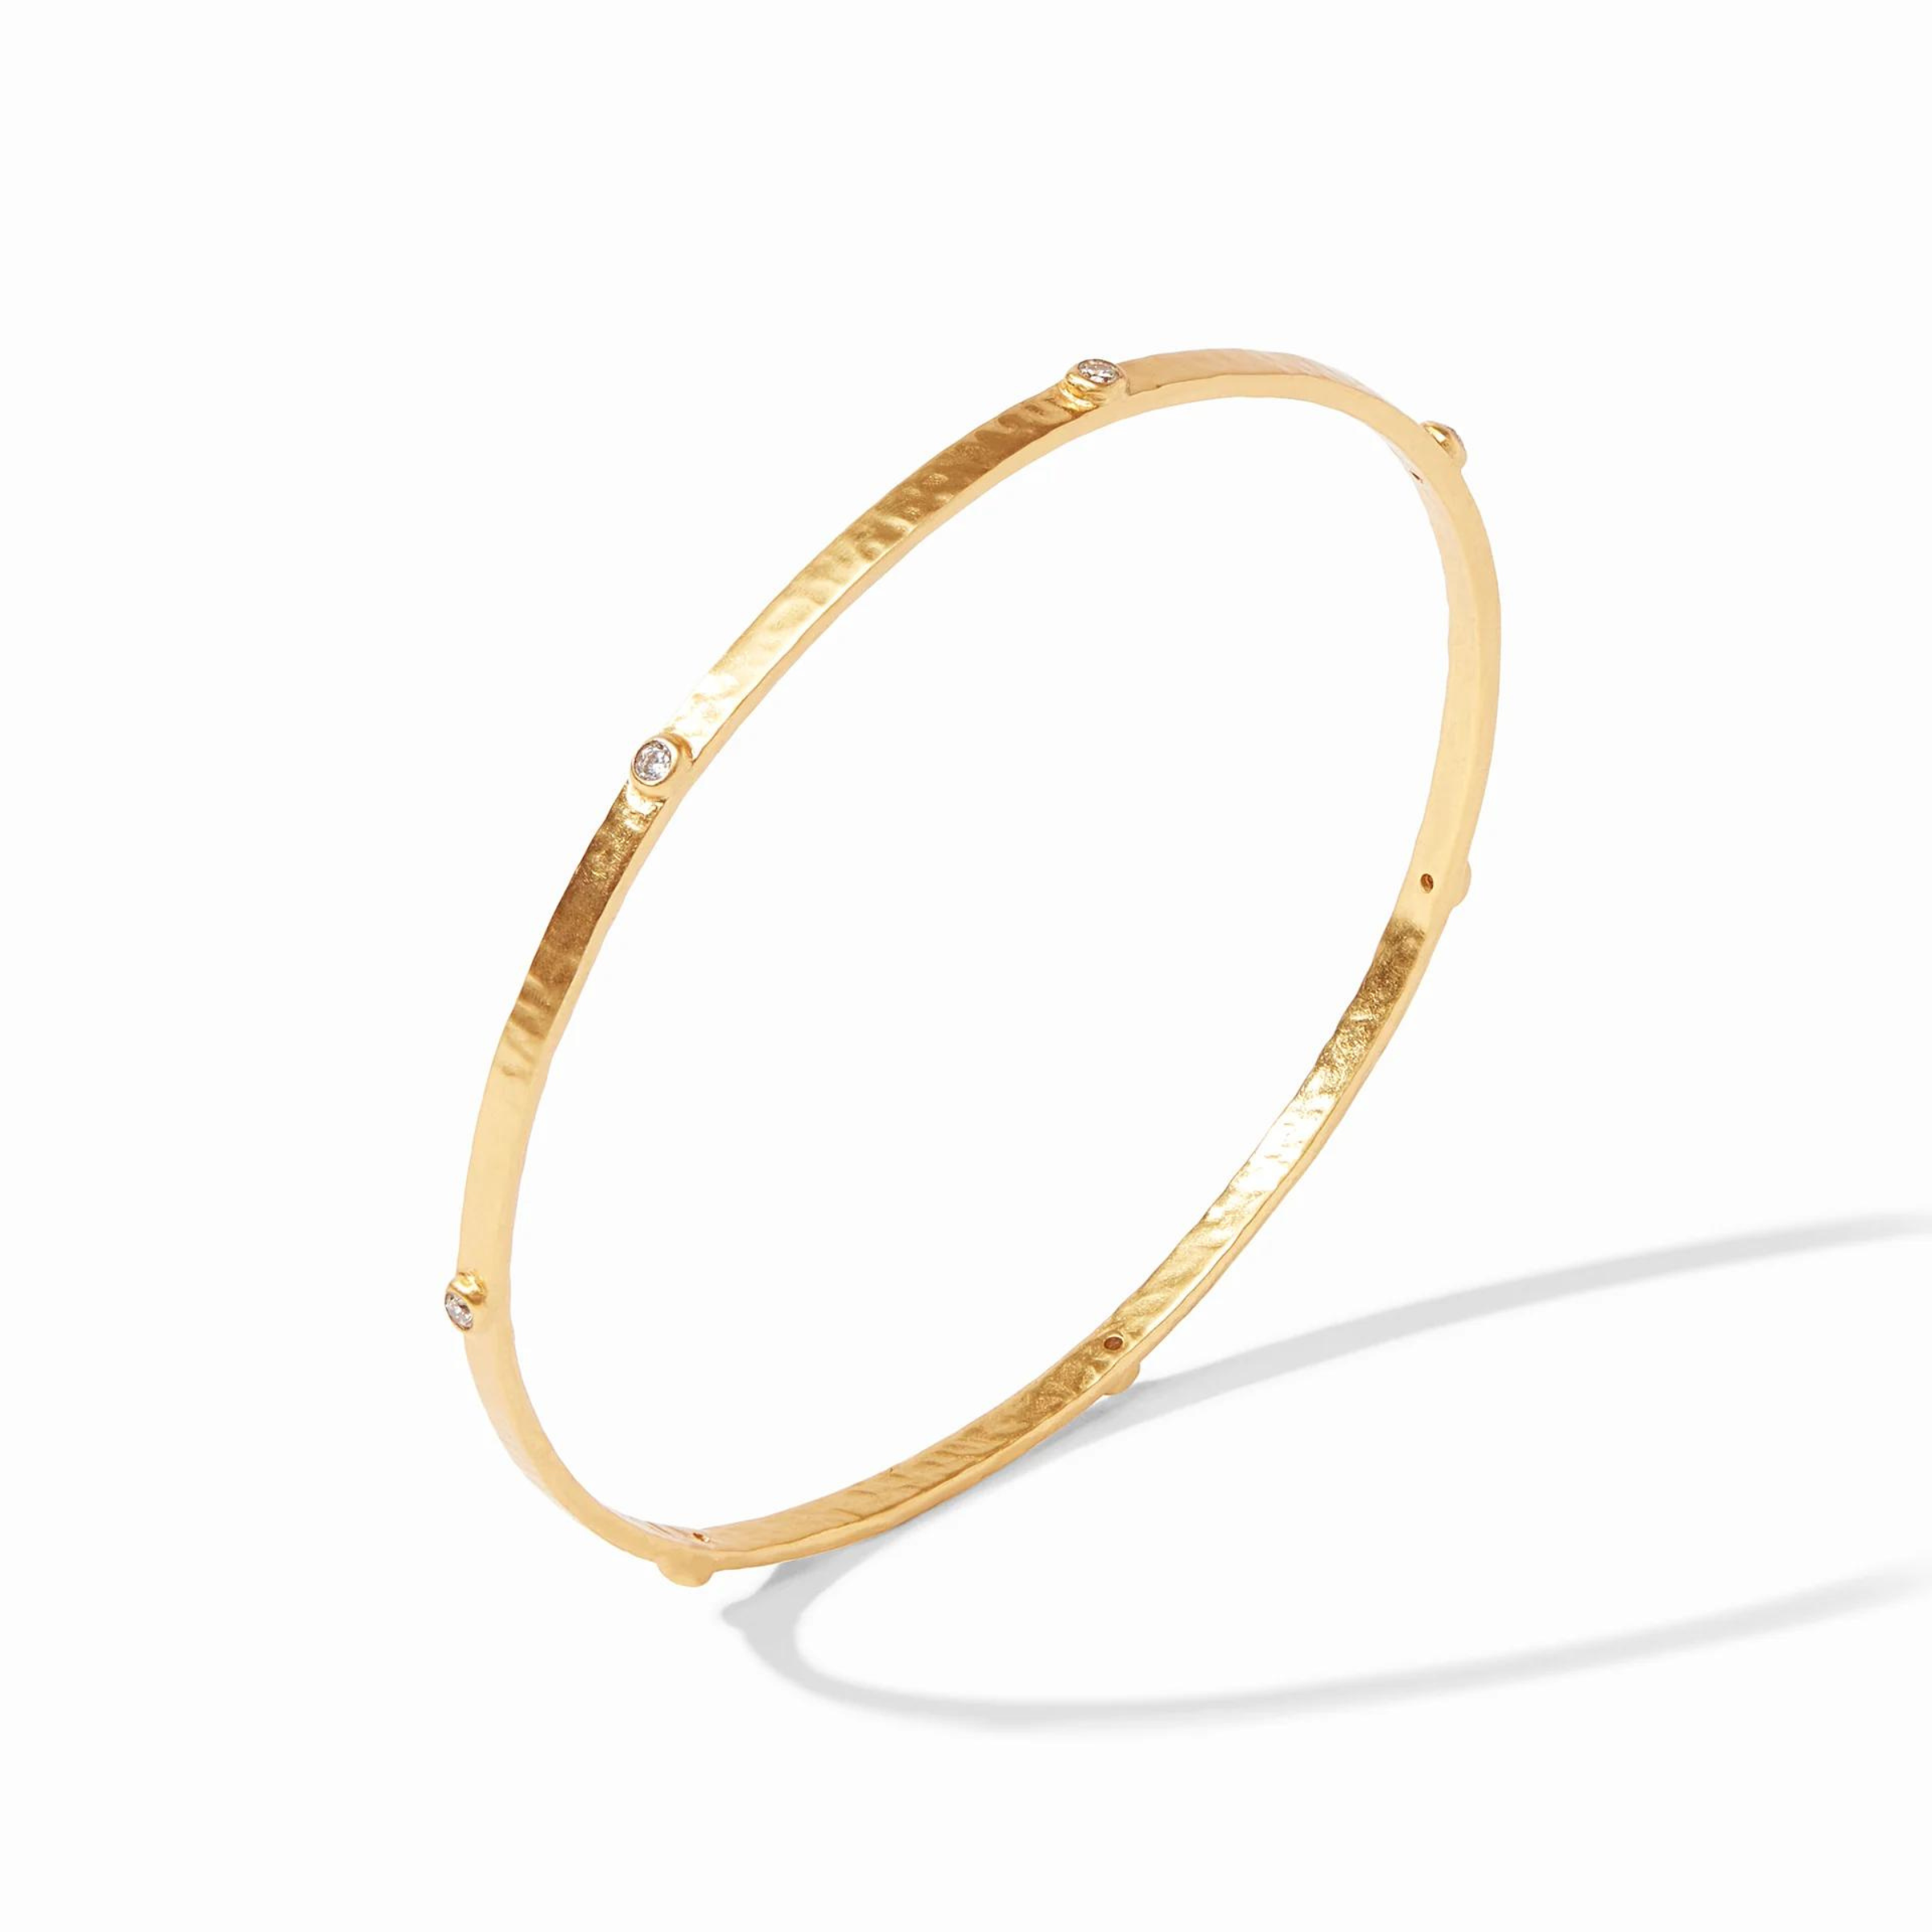 Julie Vos | Crescent Stone Bangle with CZ Crystals in Gold - Giddy Up Glamour Boutique